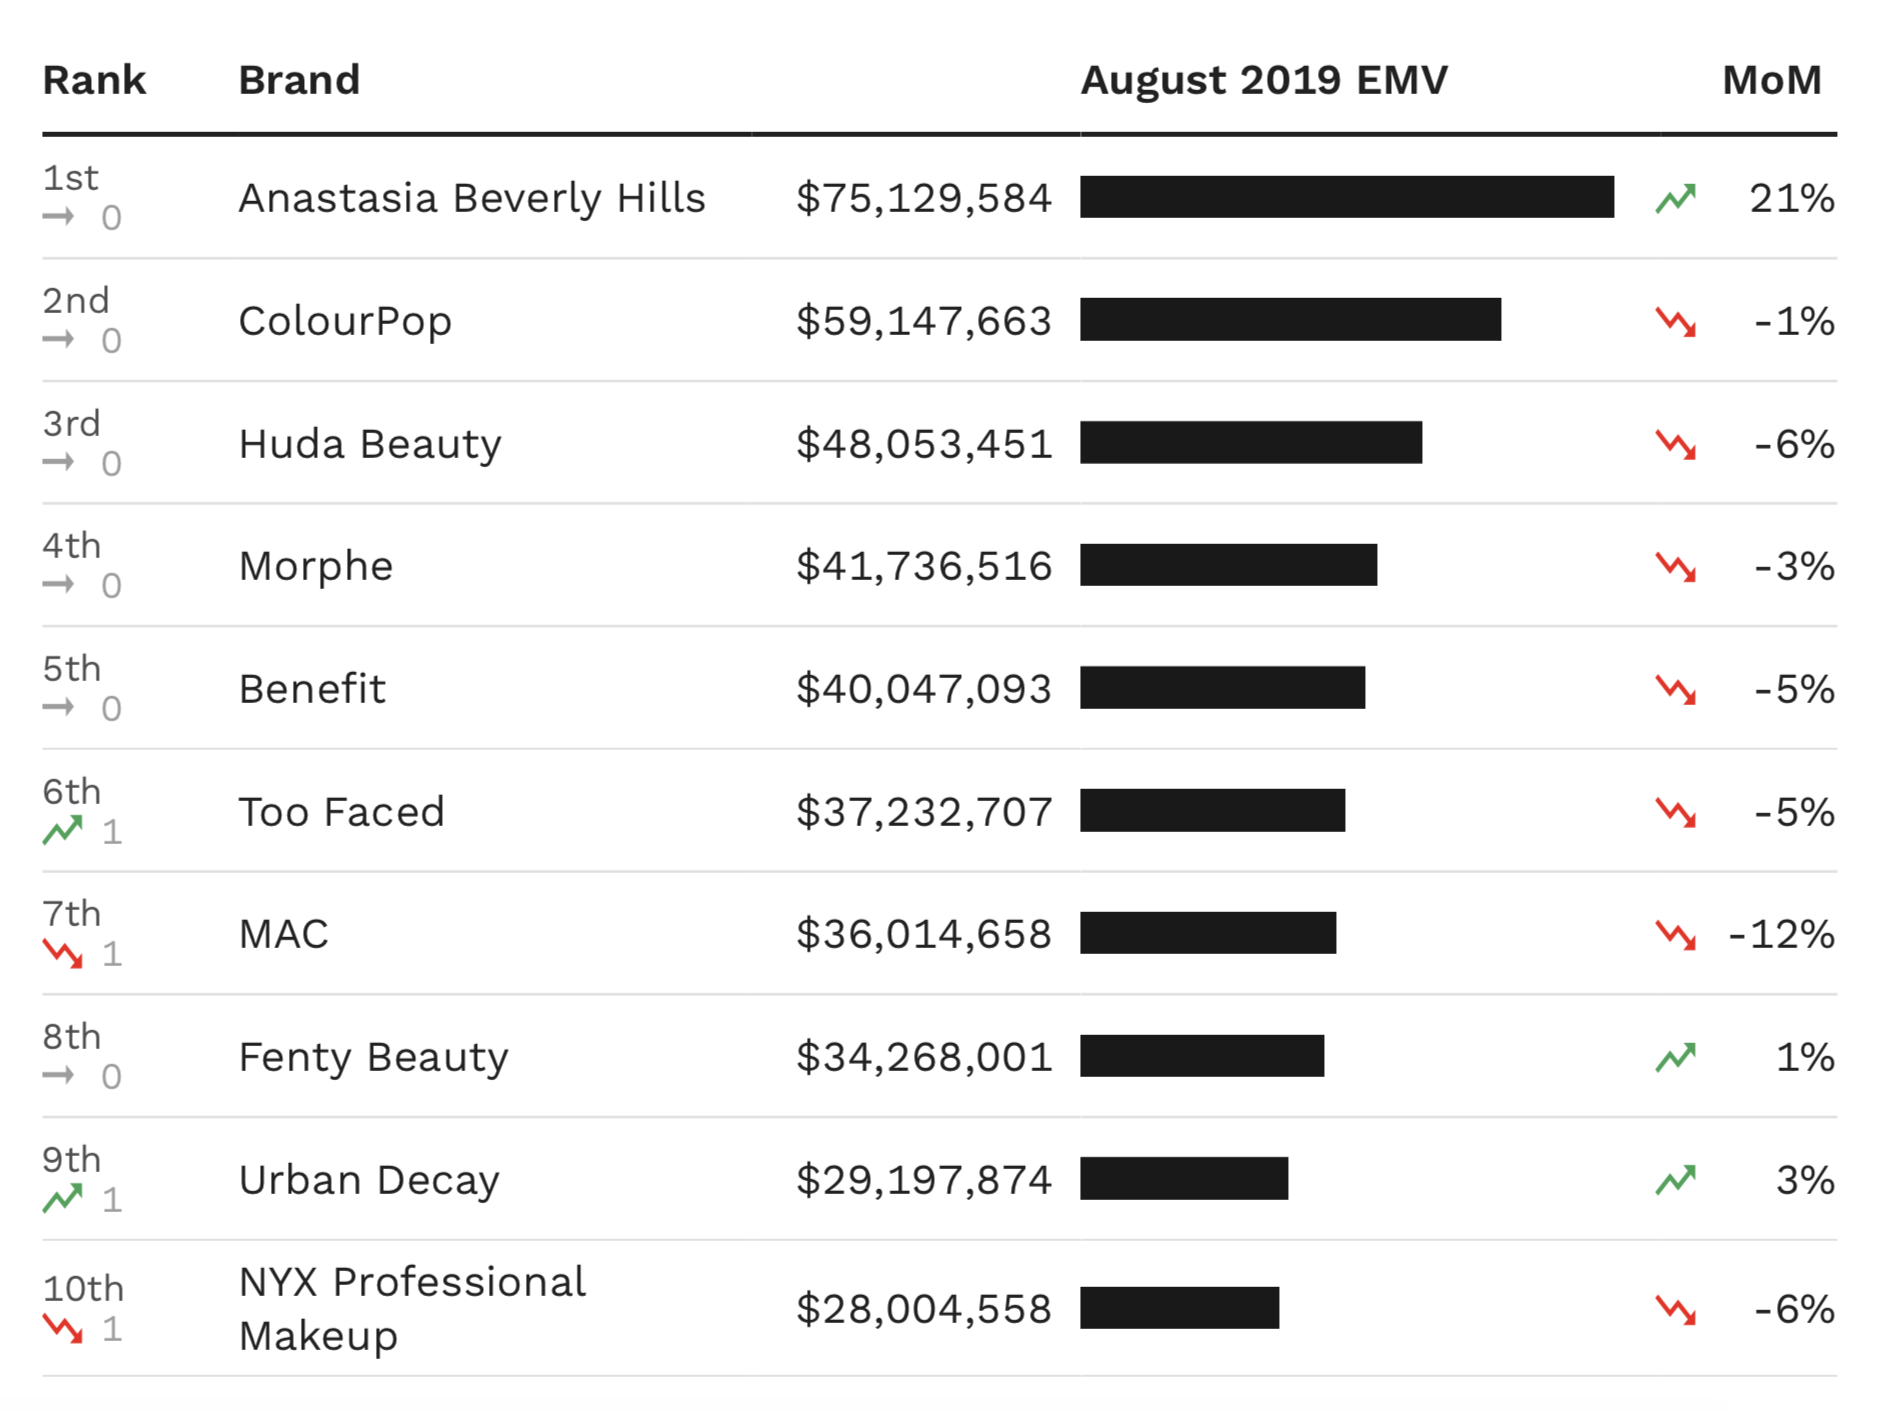 A chart showing the top 10 makeup brands in the U.S. by EMV performance in August.